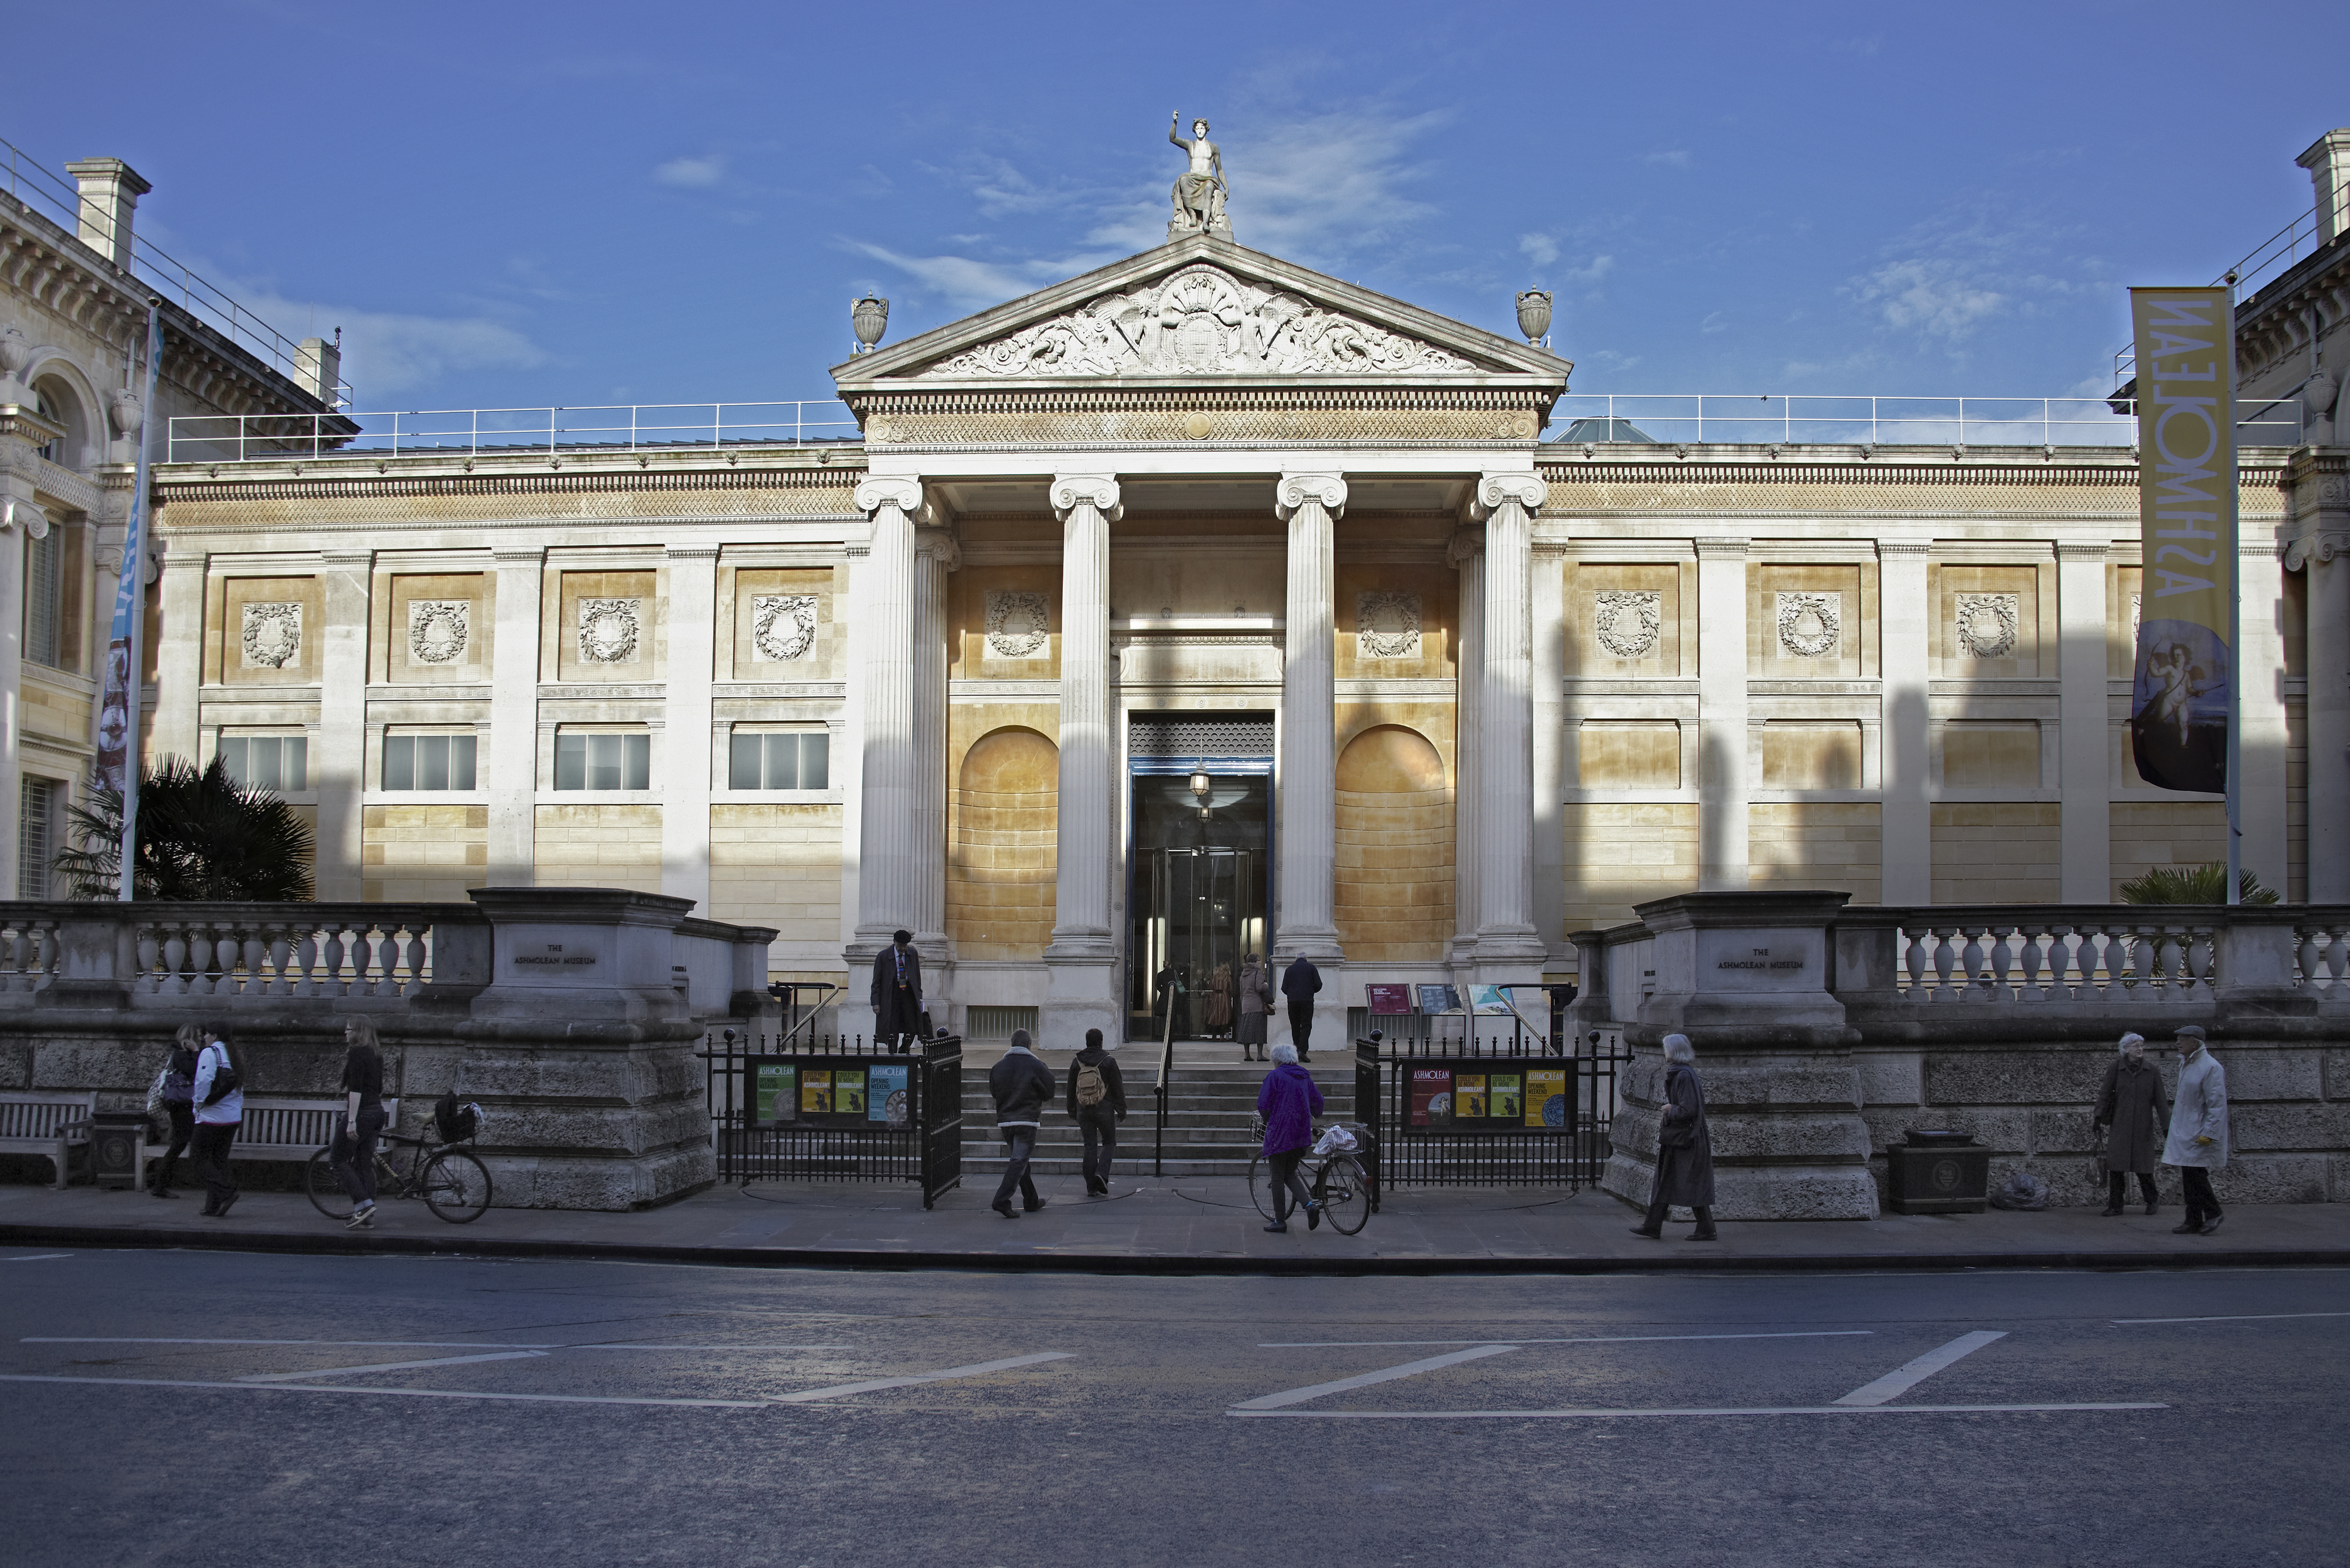 Image 'Crossing Cultures: Transforming the Ashmolean Museum, Oxford'